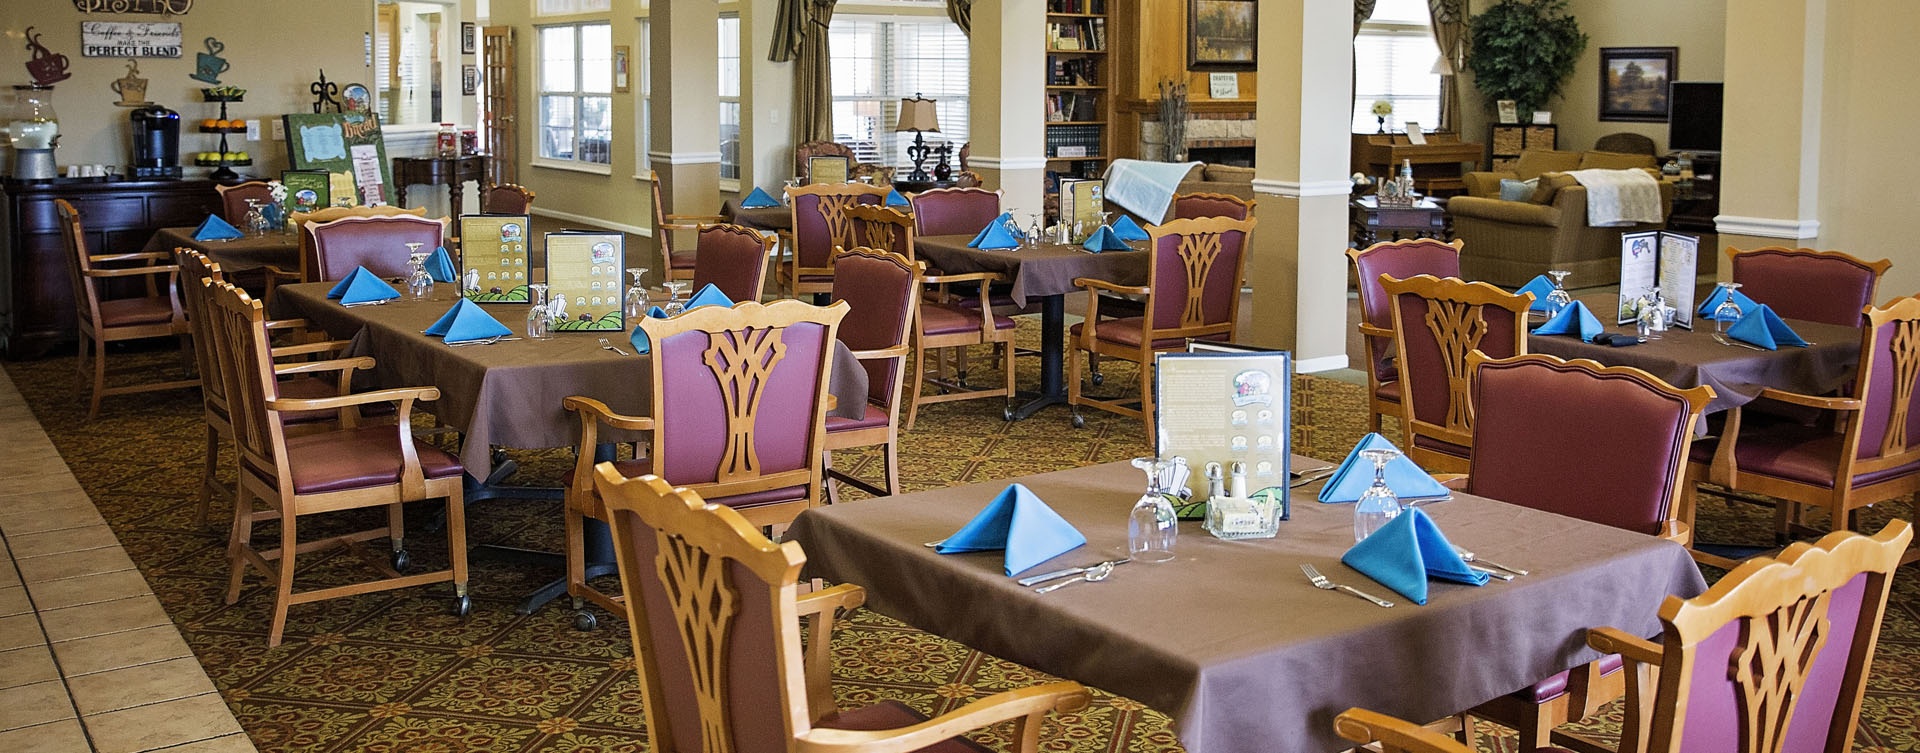 Enjoy restaurant -style meals served three times a day in our dining room at Bickford of Grand Island